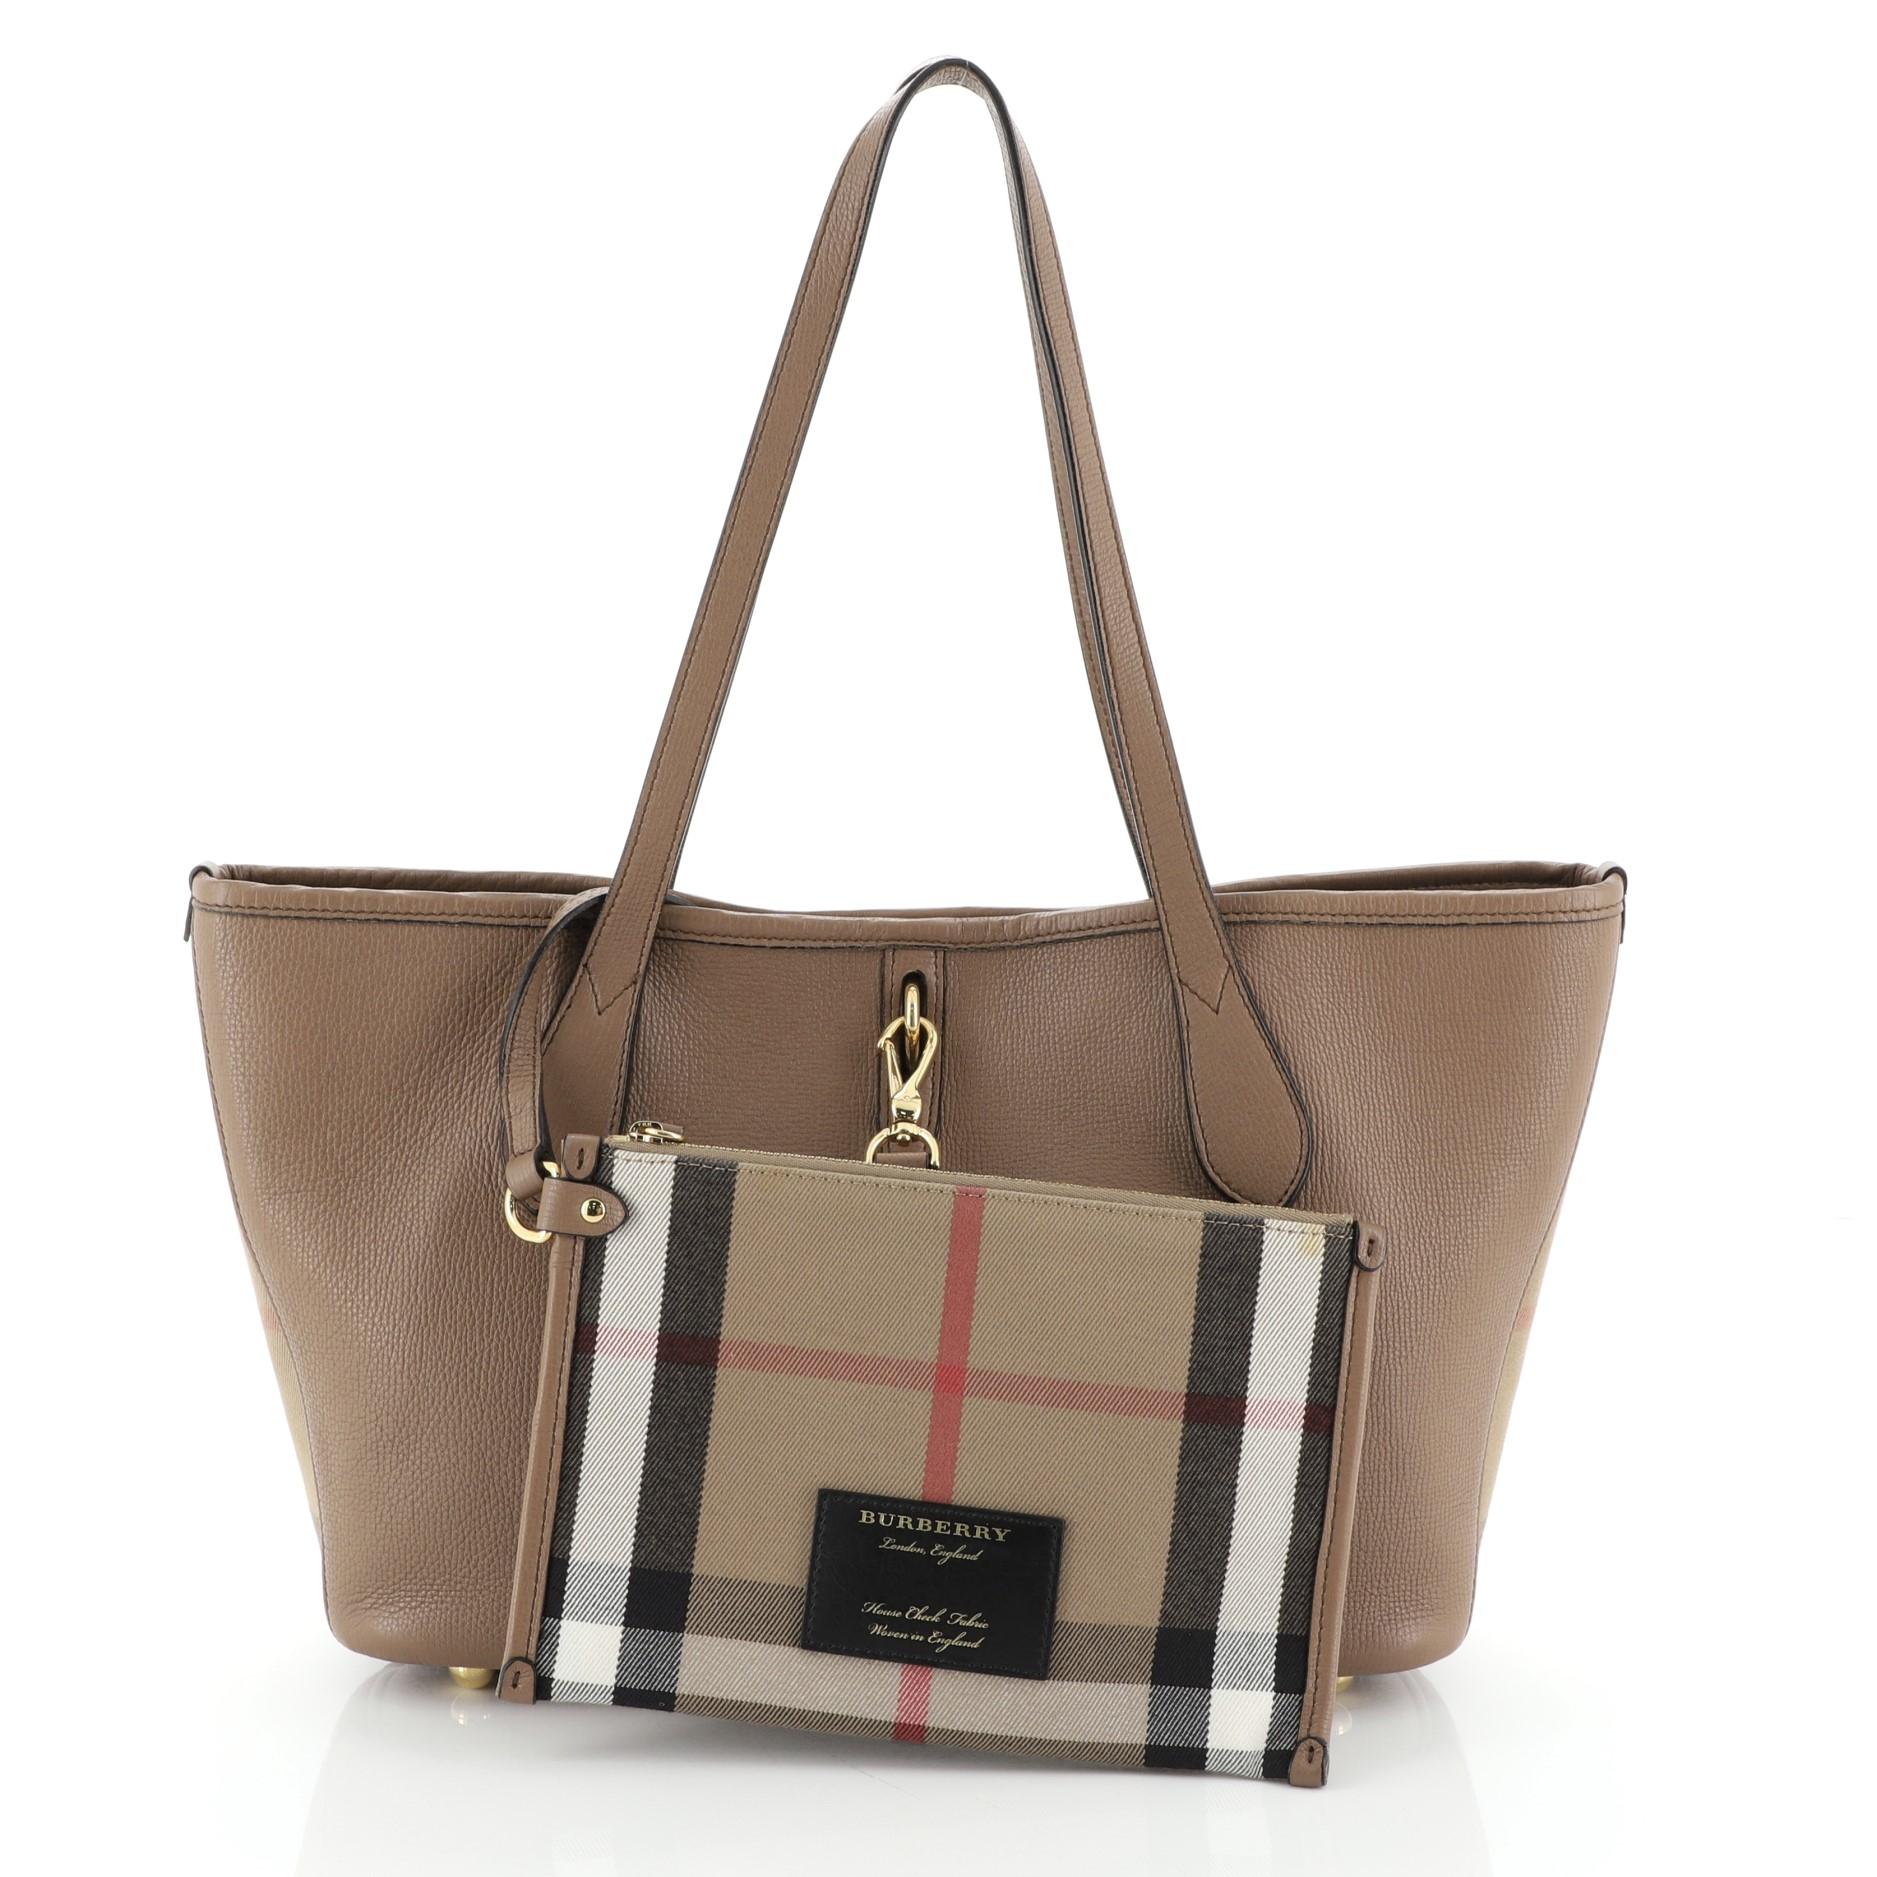 This Burberry Honeybrook Tote Leather Medium, crafted from brown and neutral printed leather, features dual flat leather handles, protective base studs, and gold-tone hardware. It opens to a check printed brown fabric interior. 

Estimated Retail